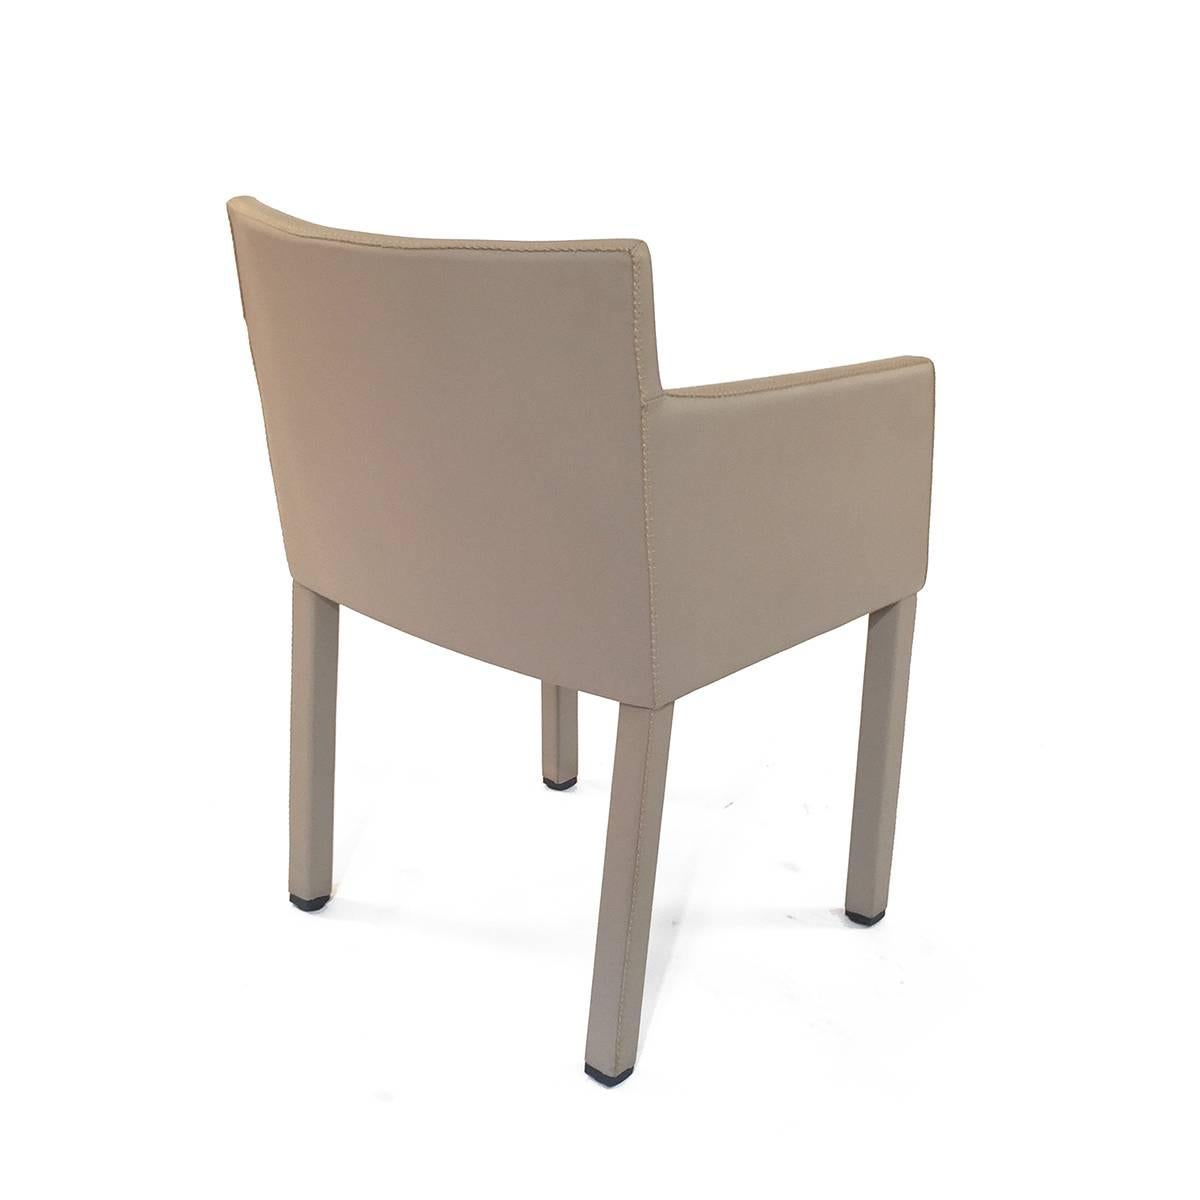 Italian Tan Leather Masai Armchair by Lievore Altherr Molina for Arper, Italy Modern For Sale